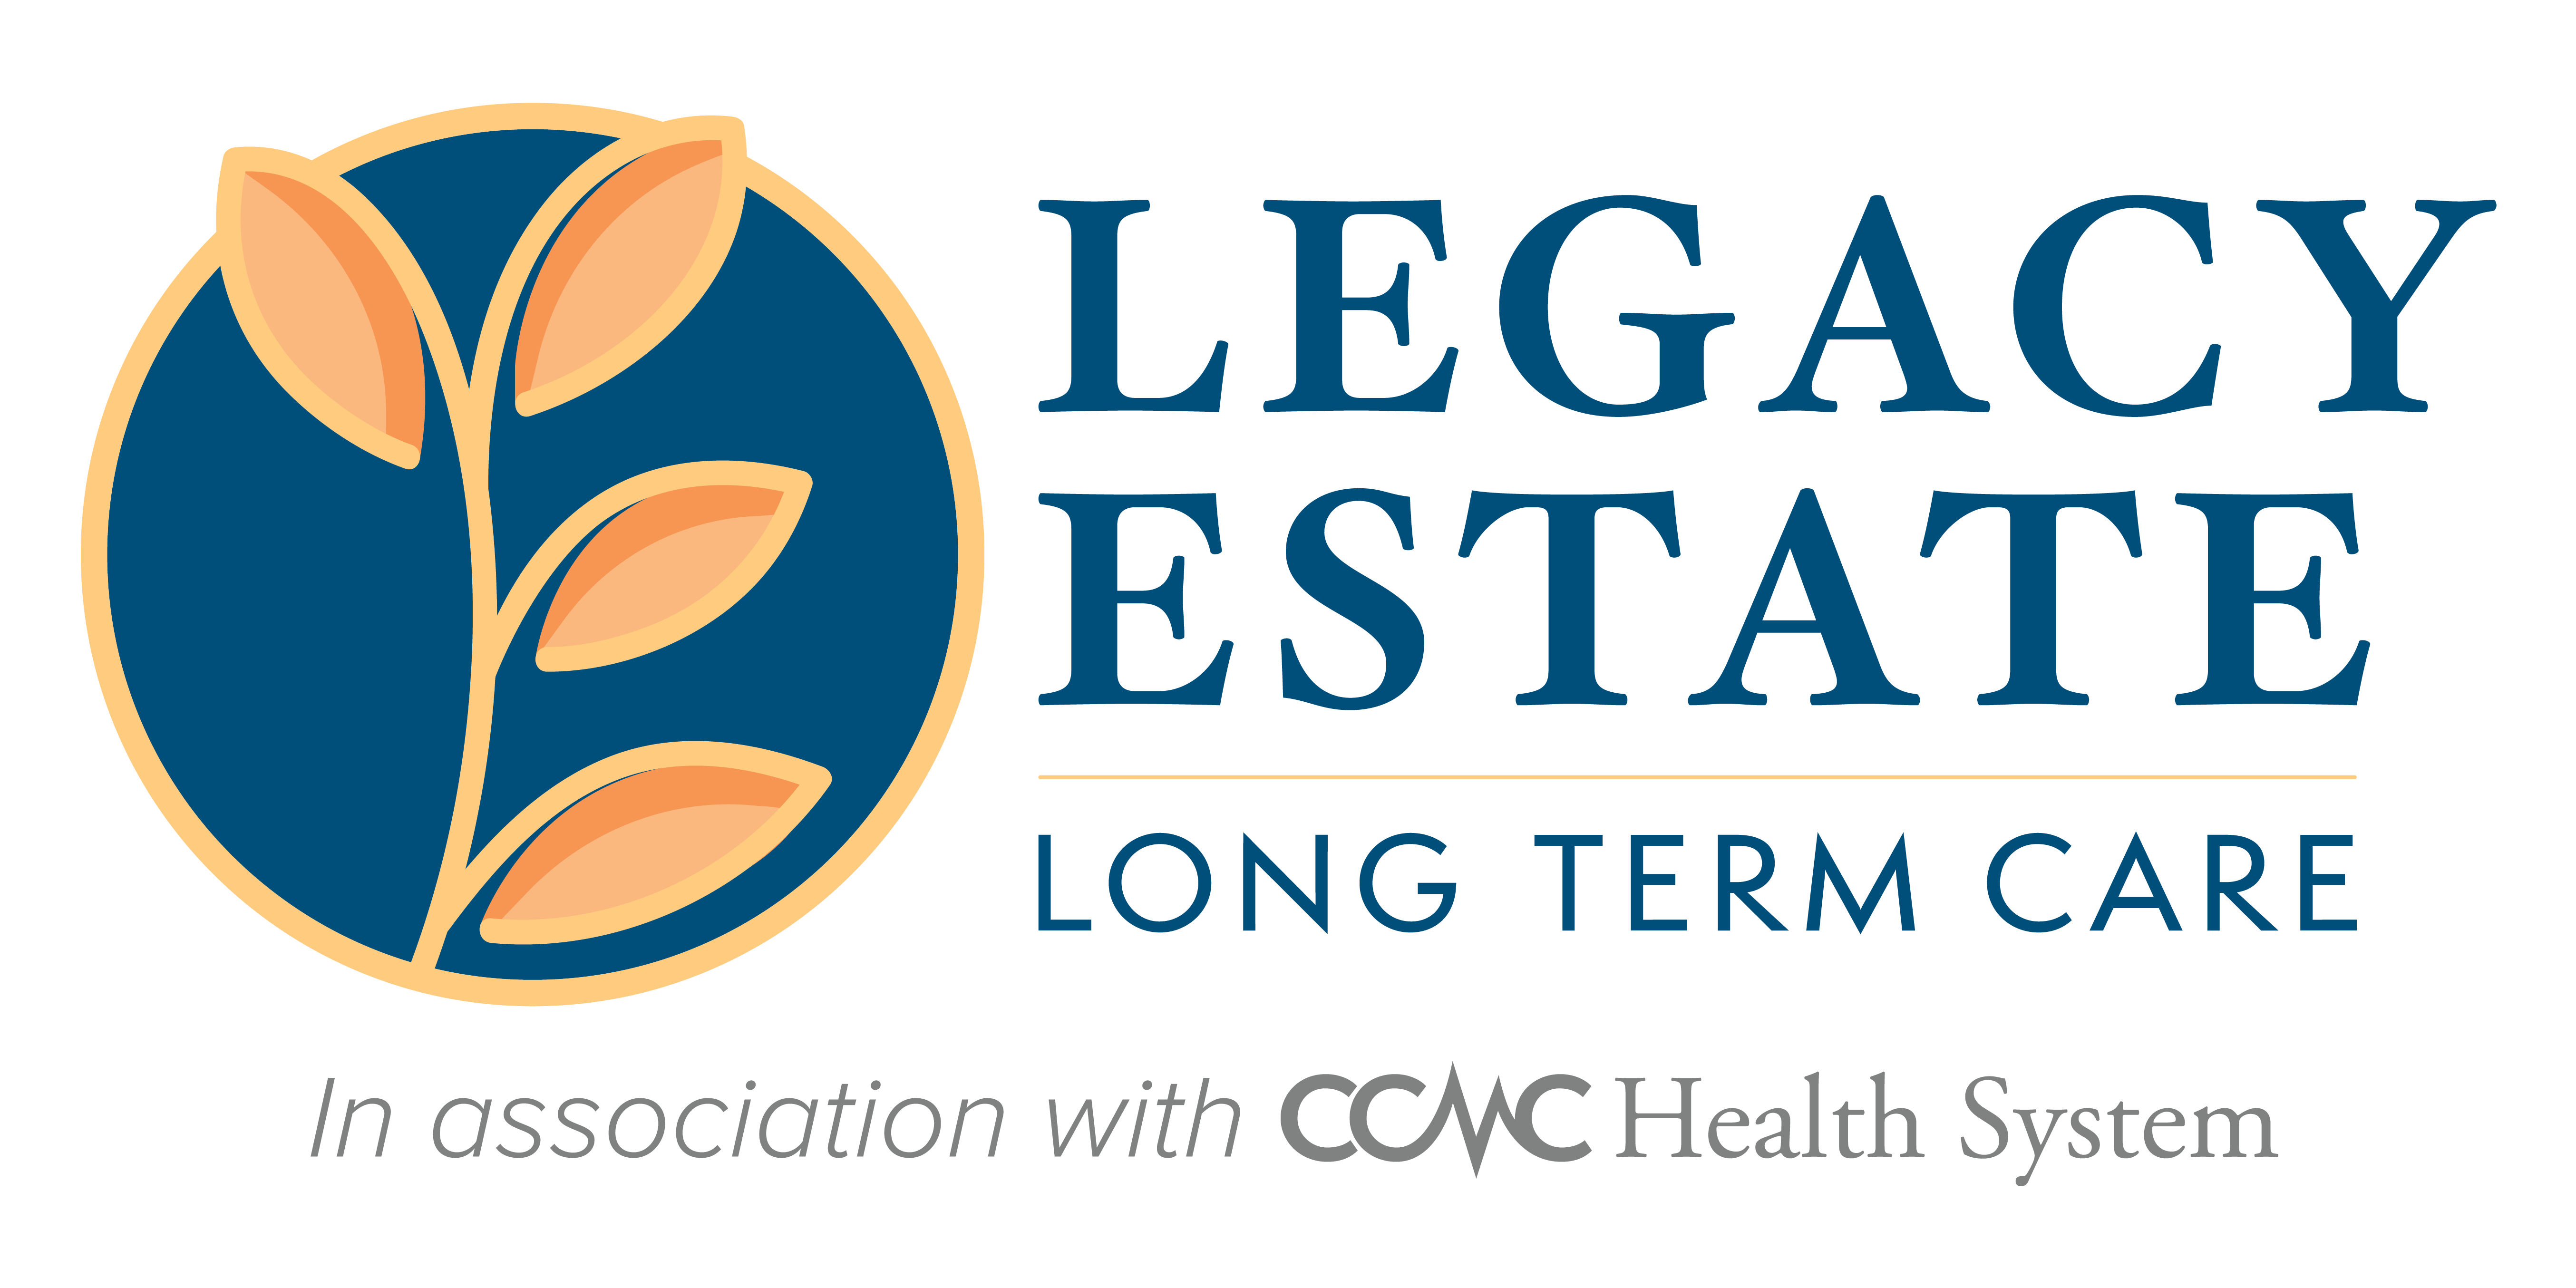 Legacy Estate, Long Term Care - In association with CCMC Health System Logo